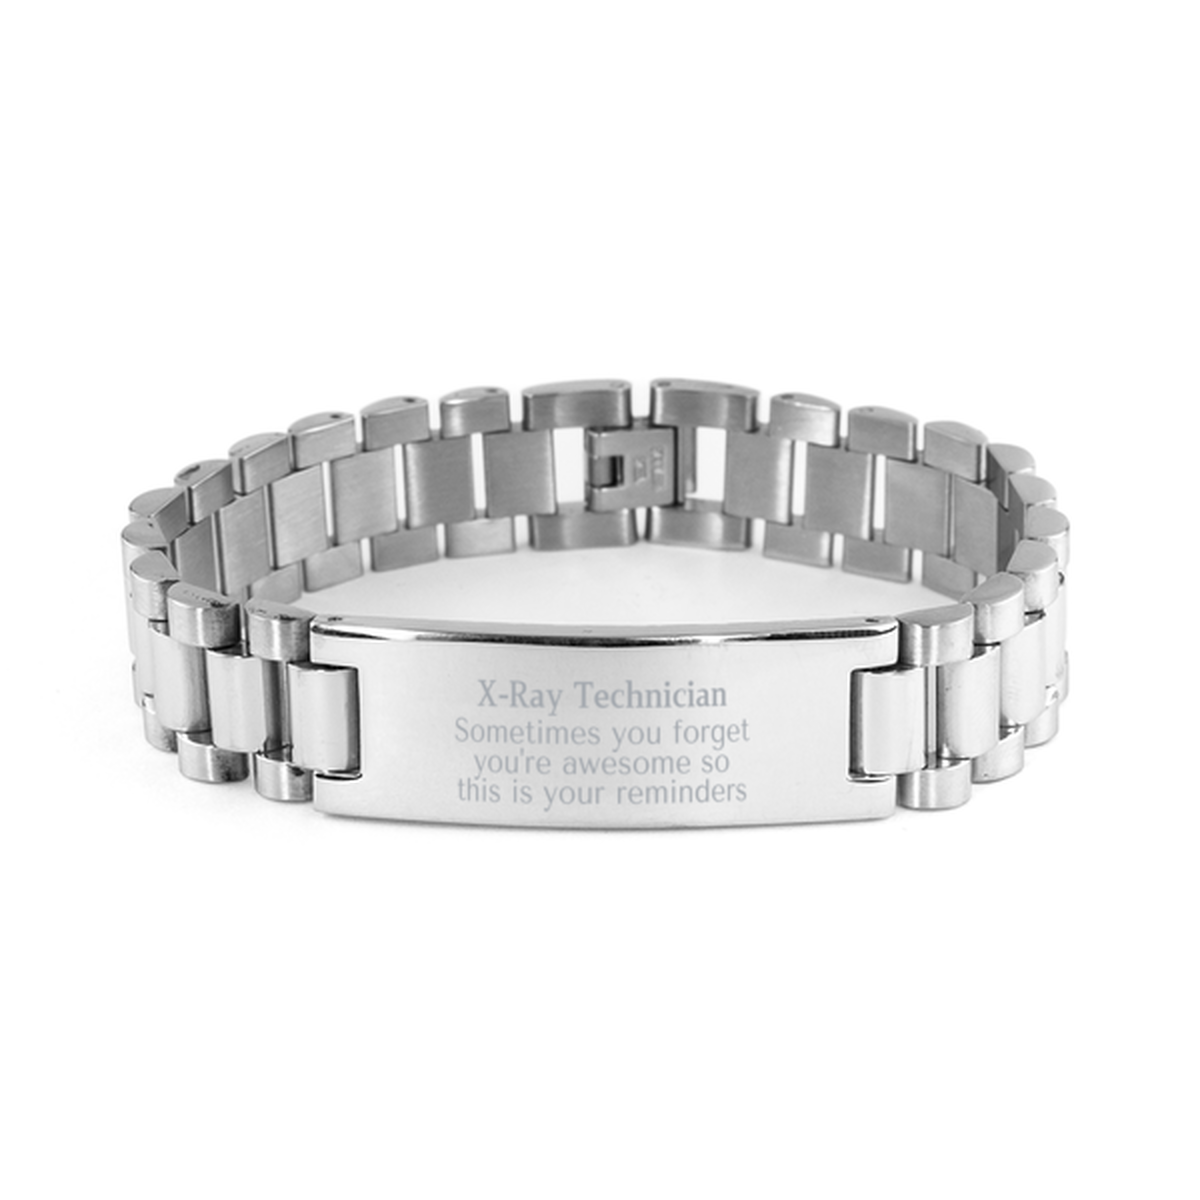 Sentimental X-Ray Technician Ladder Stainless Steel Bracelet, X-Ray Technician Sometimes you forget you're awesome so this is your reminders, Graduation Christmas Birthday Gifts for X-Ray Technician, Men, Women, Coworkers